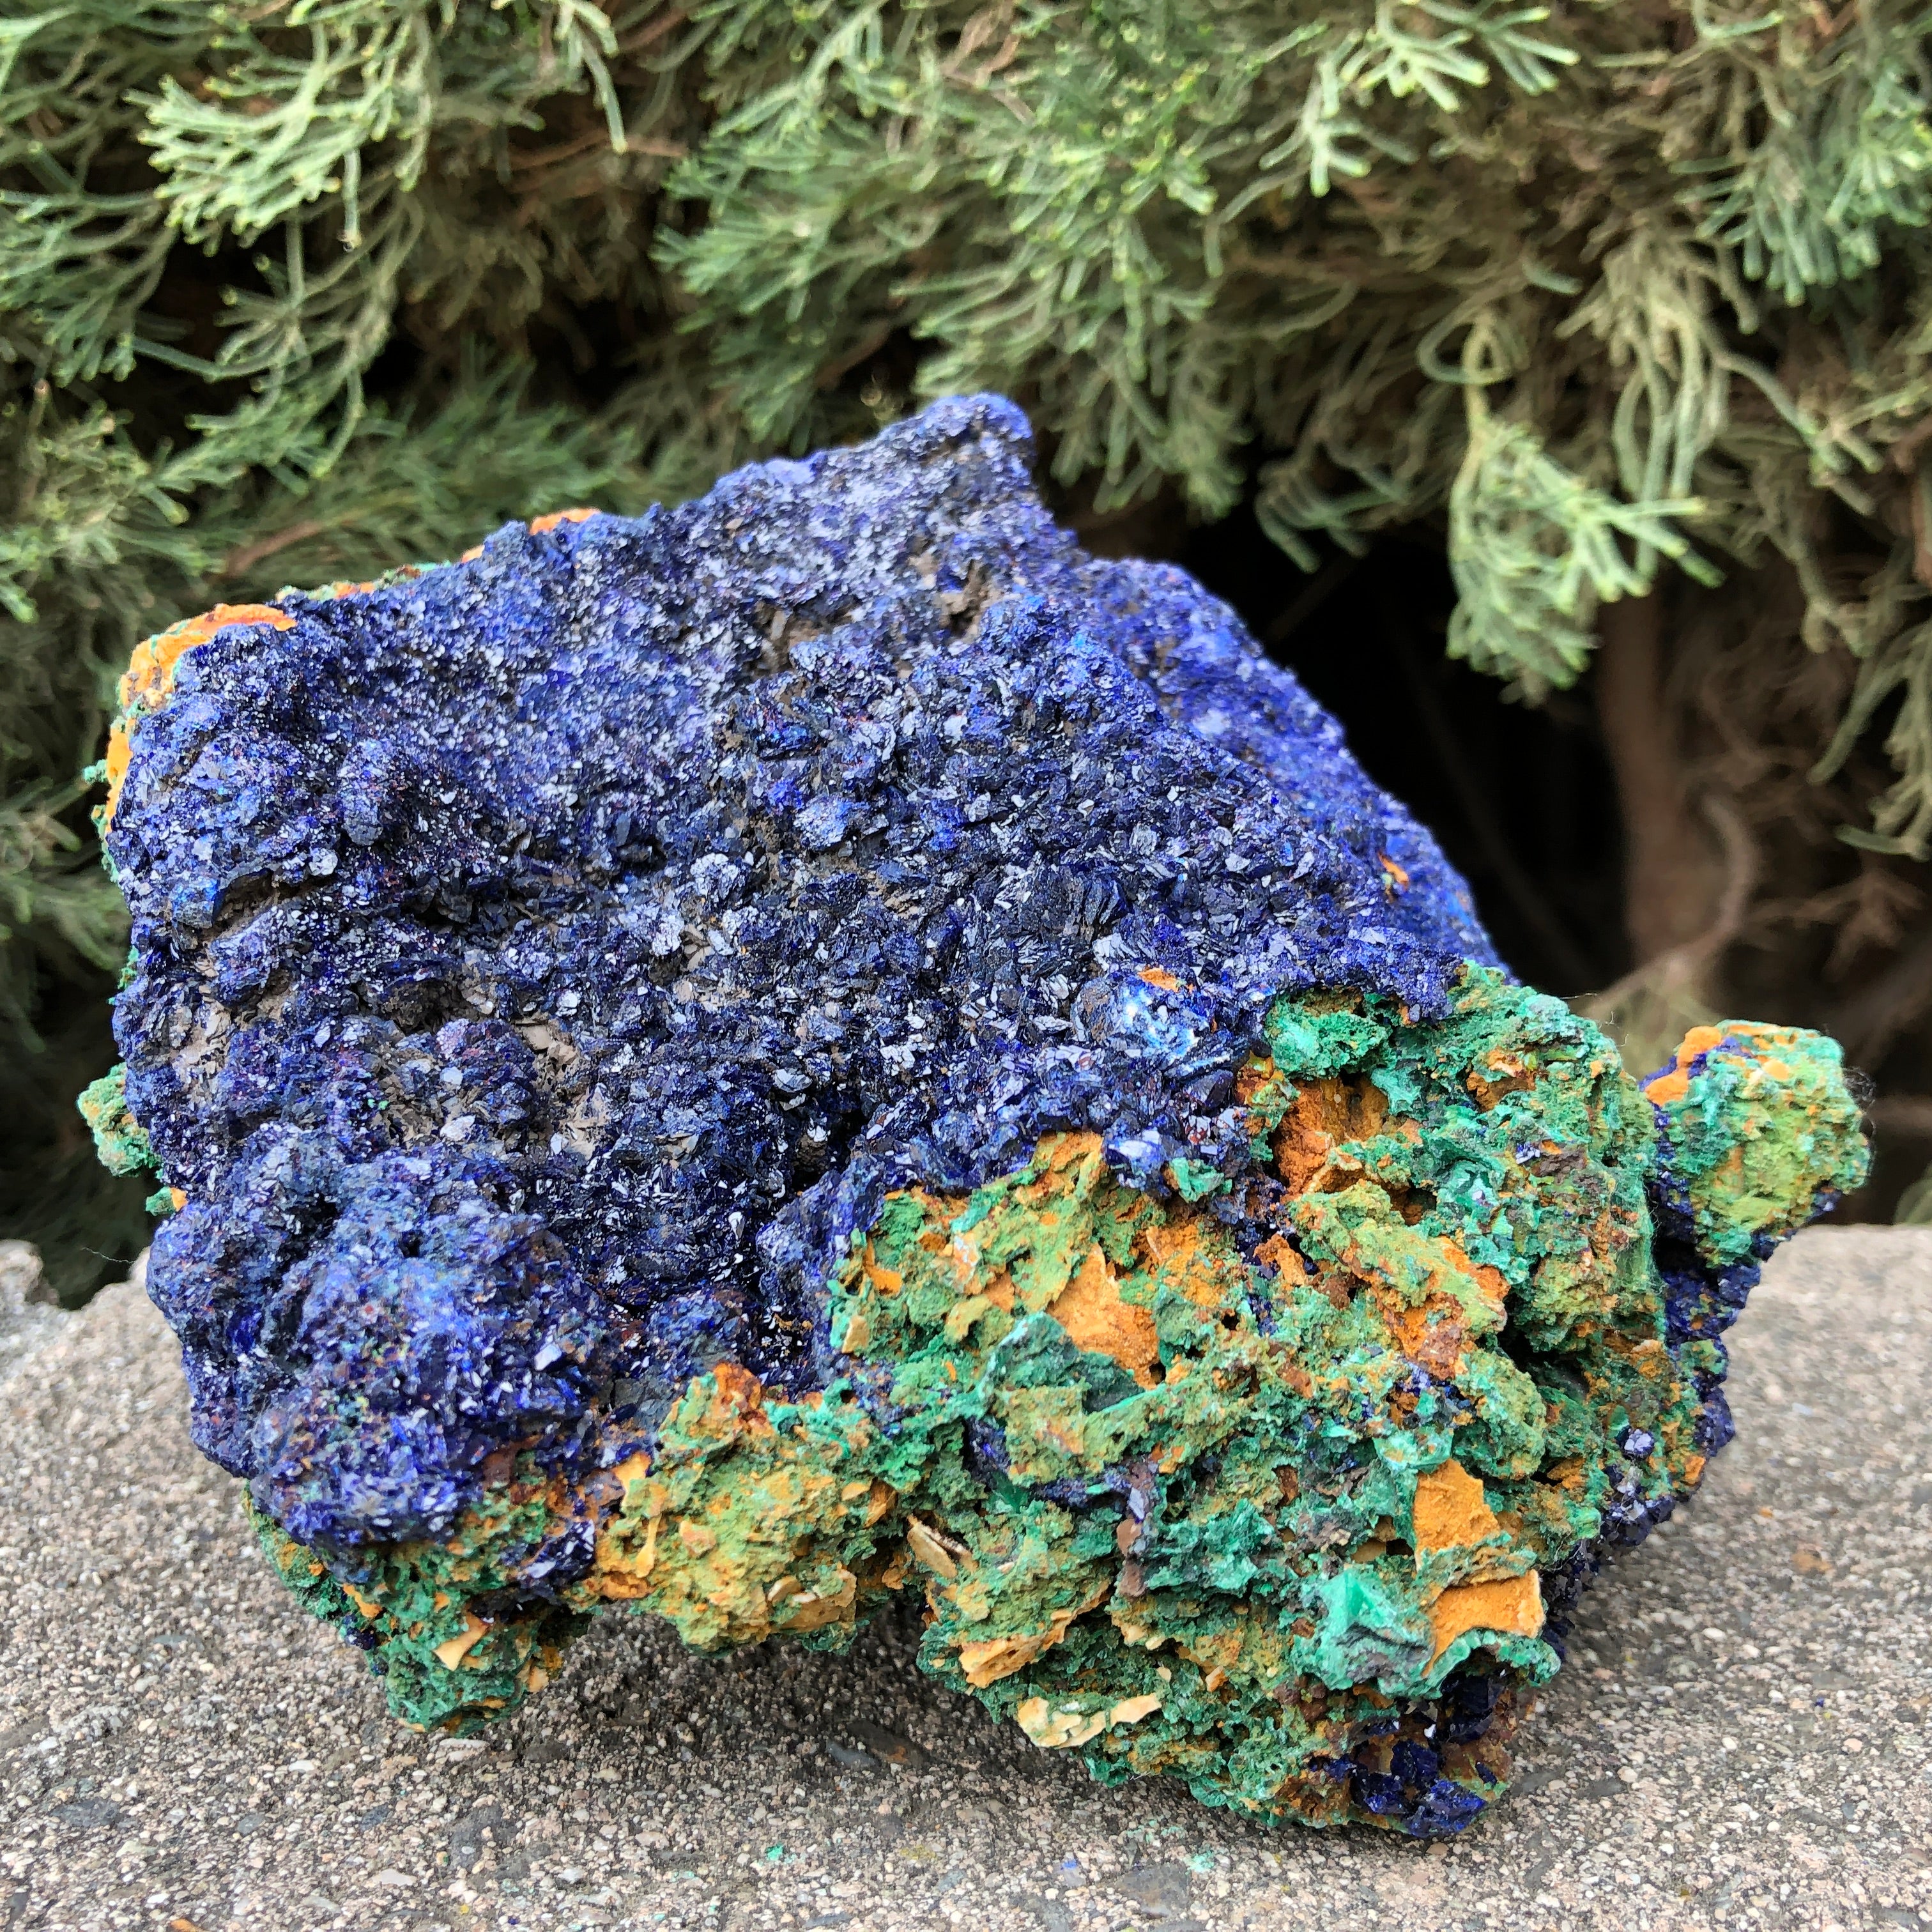 968g 15x13x10cm Giant Blue Azurite from Sepon Mine, Laos